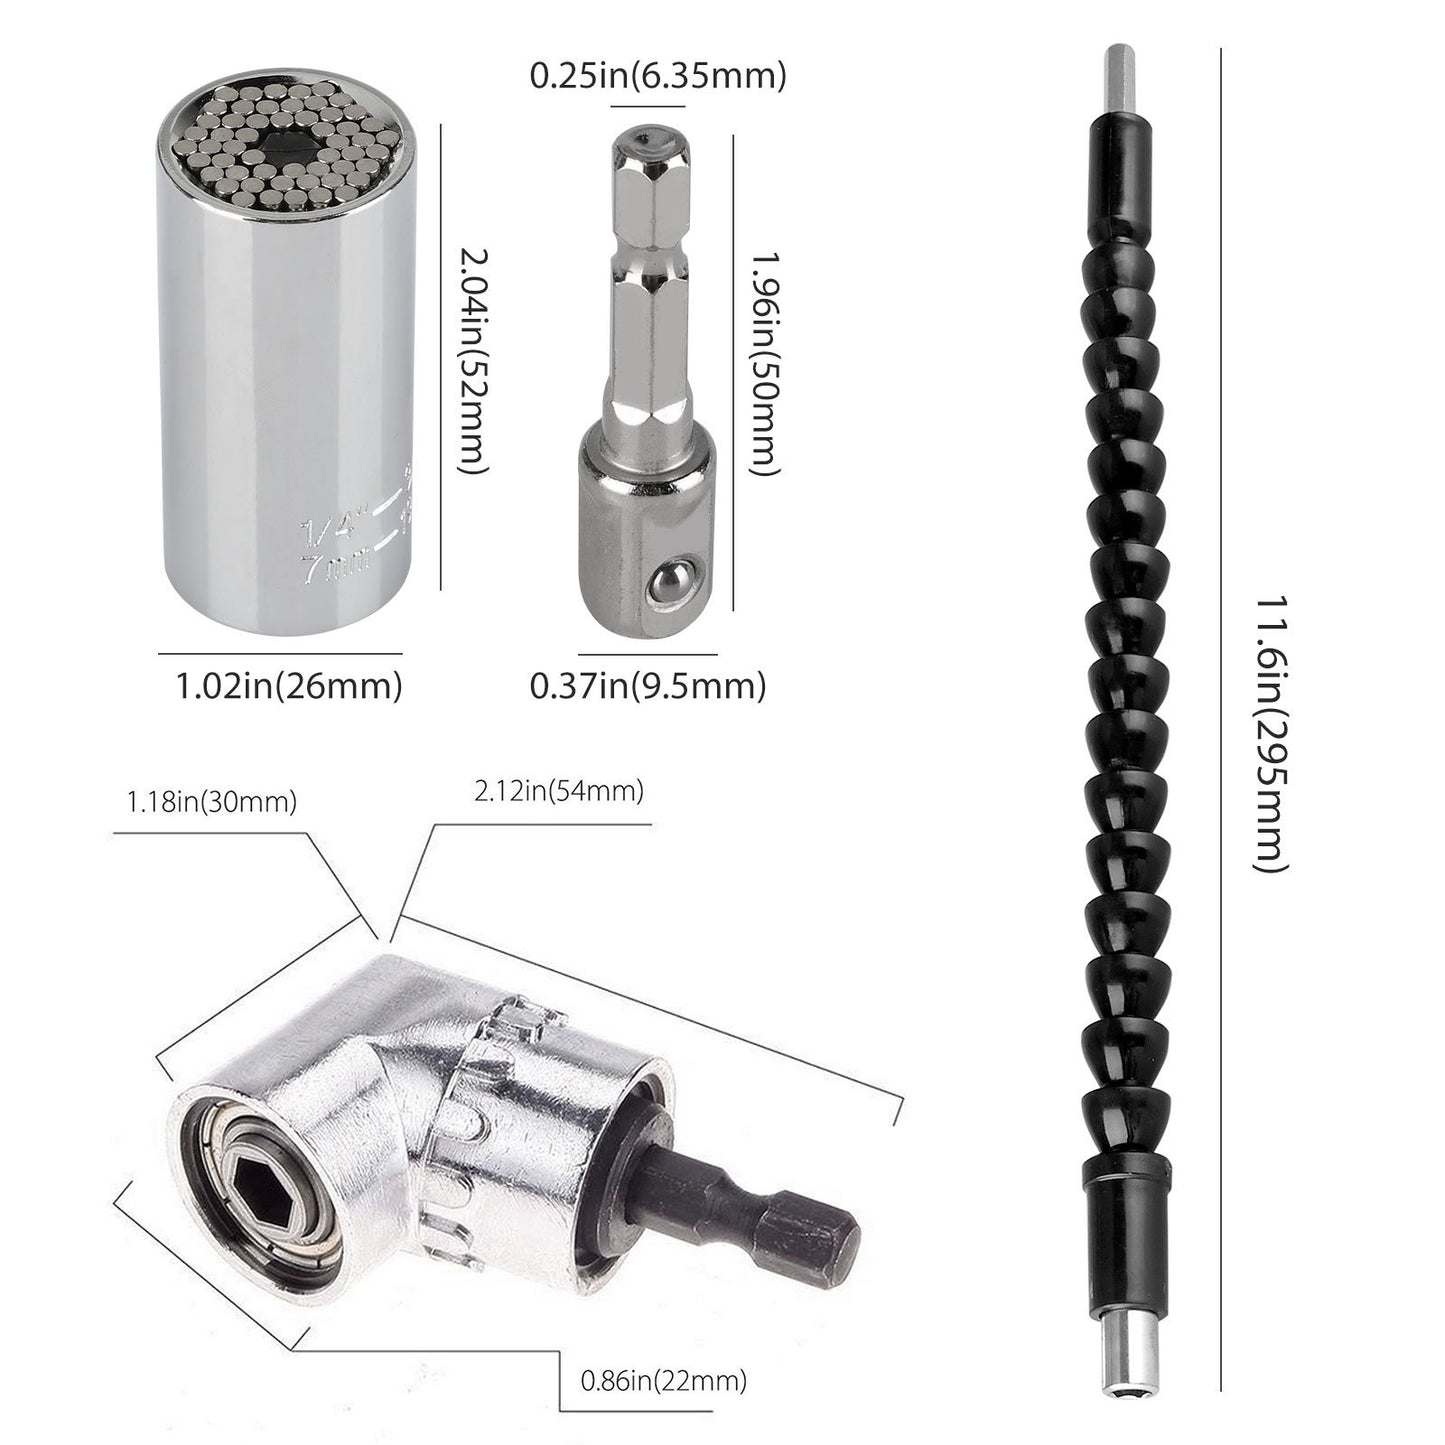 Universal Socket Grip Ratchet Wrench Power Drill Adapter